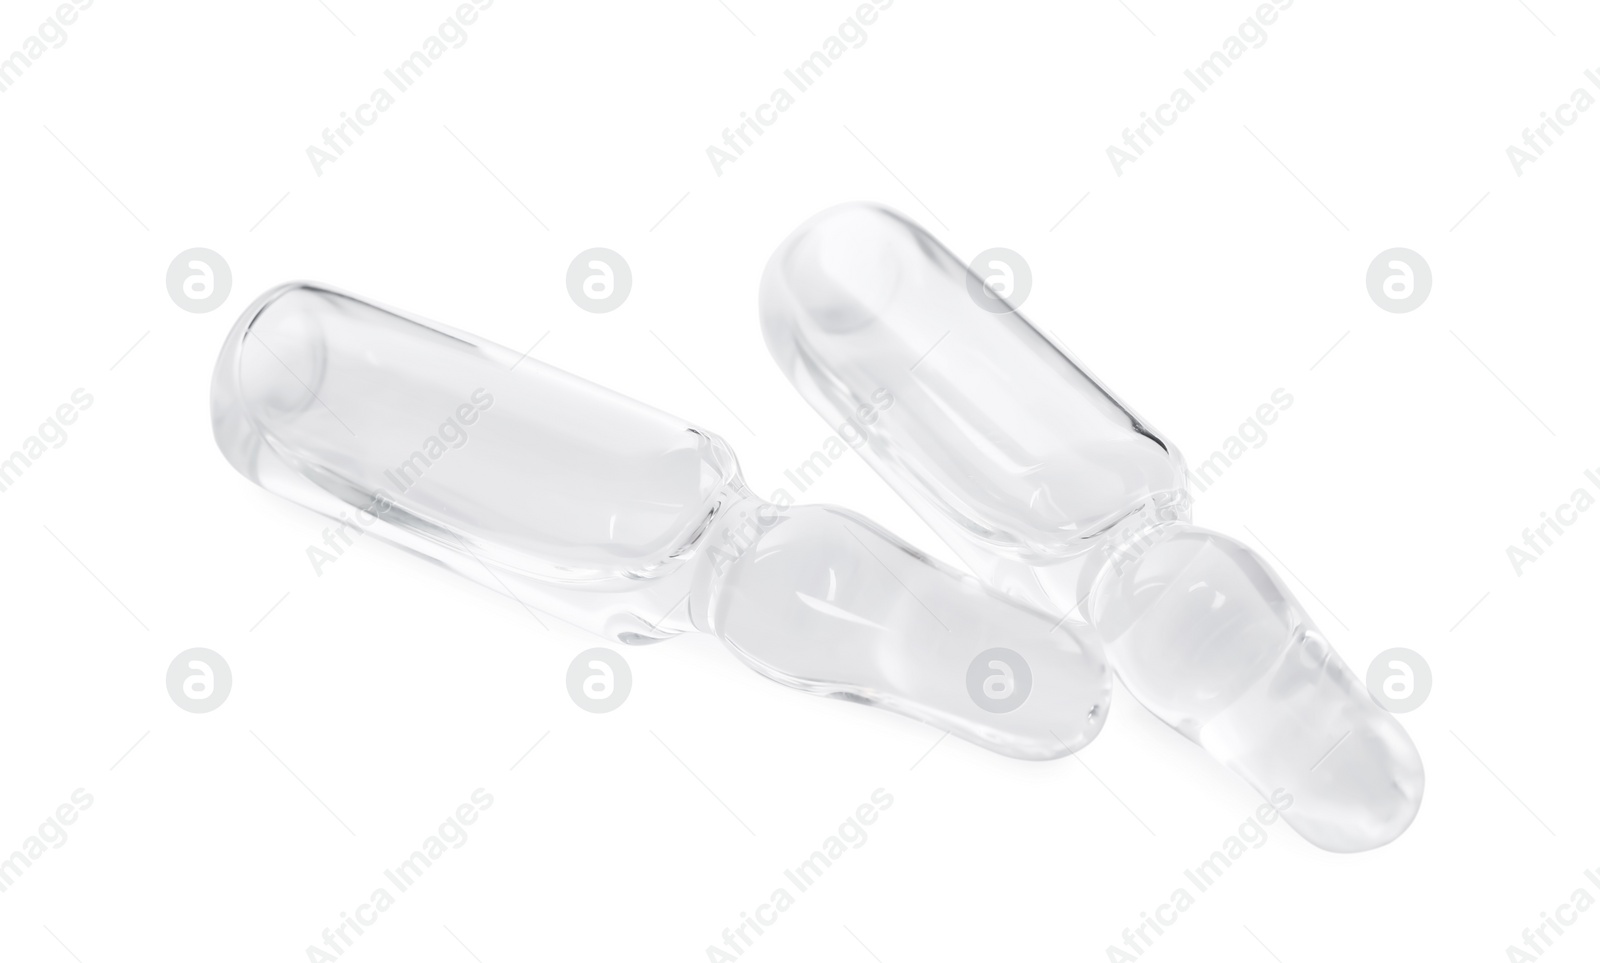 Photo of Glass ampoules with pharmaceutical product on white background